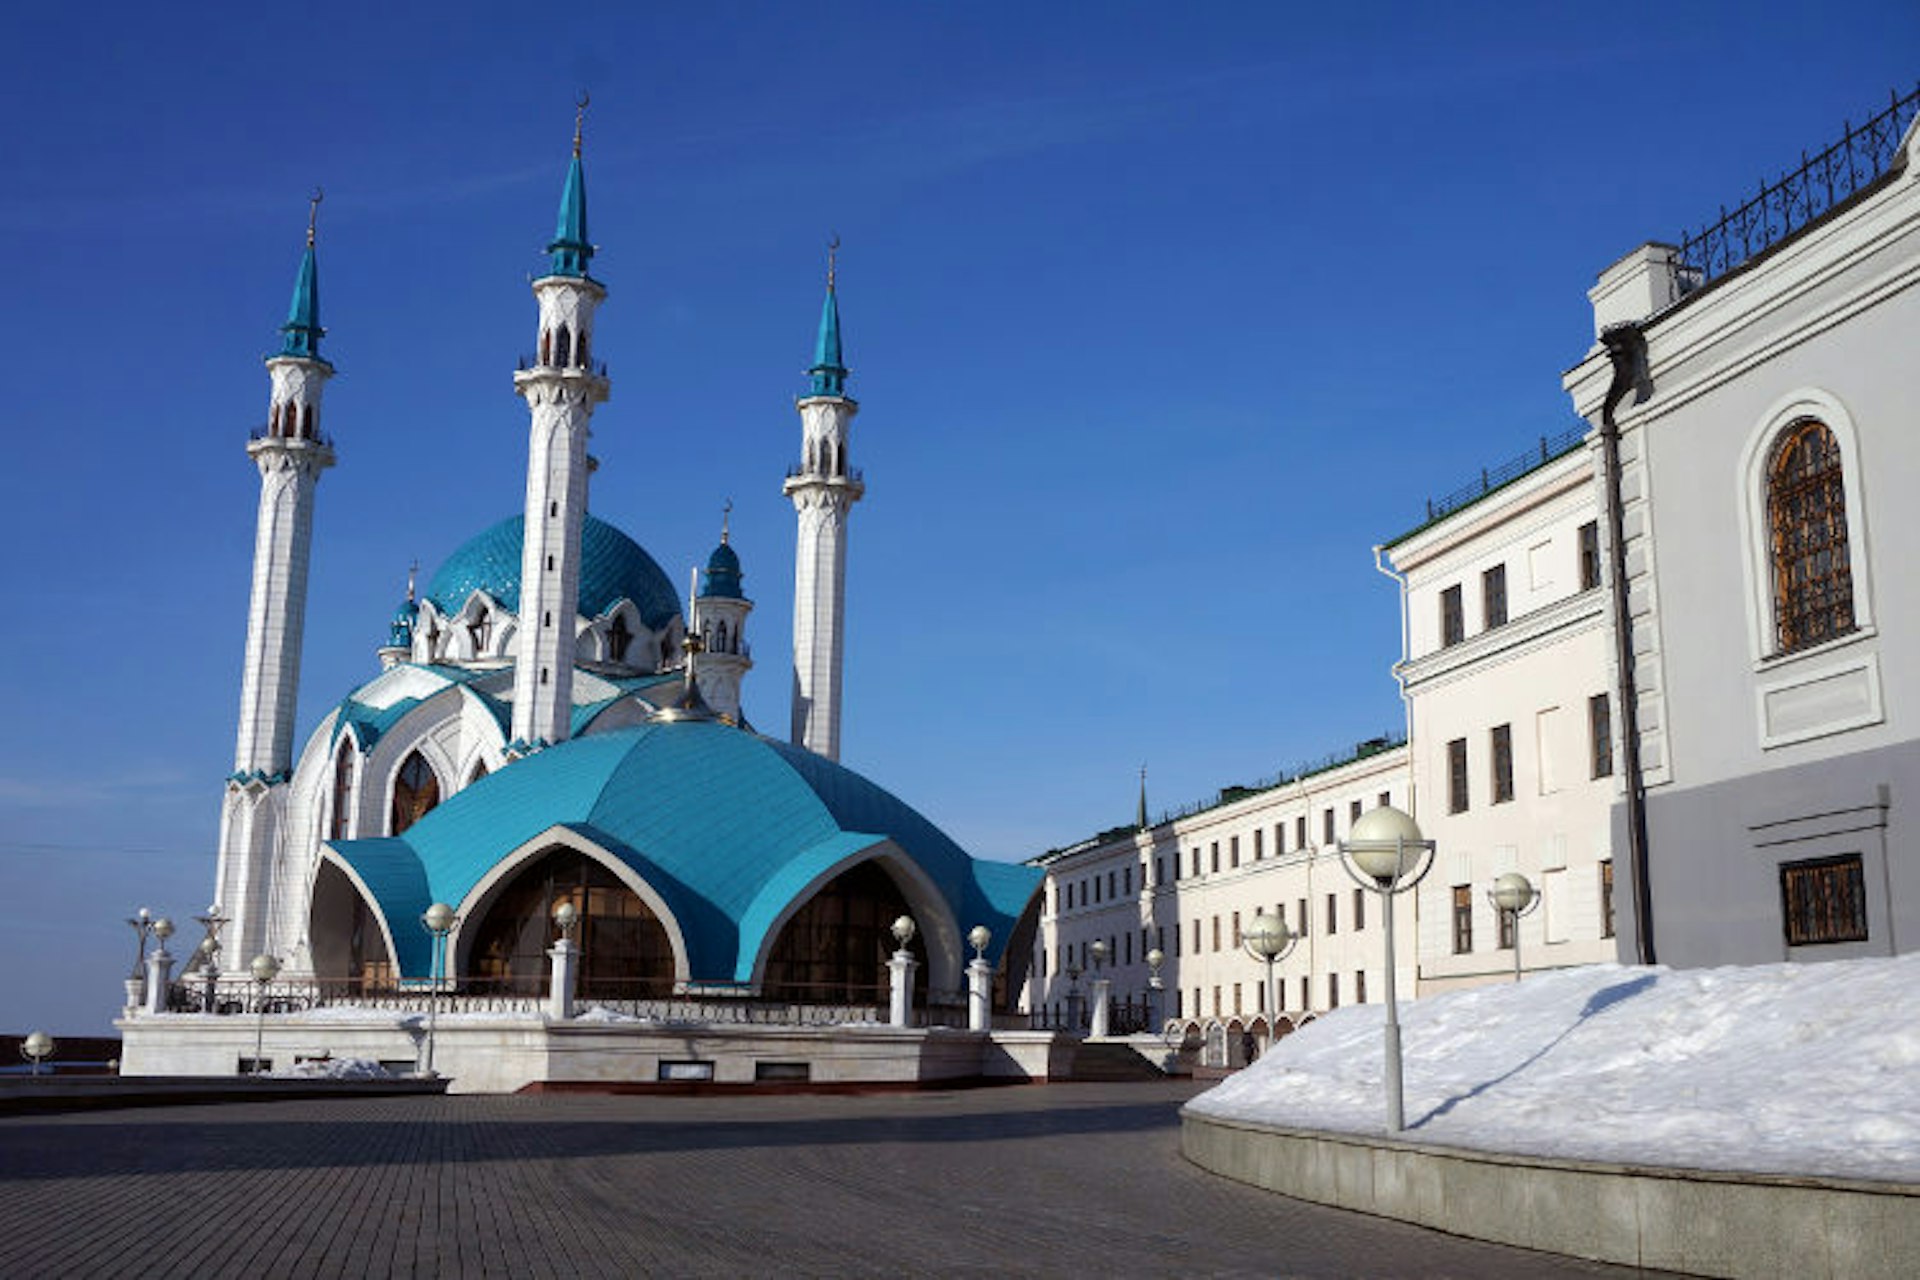 The Kul Sharif Mosque hosts an Islamic museum. Image by Anita Isalska / Lonely Planet